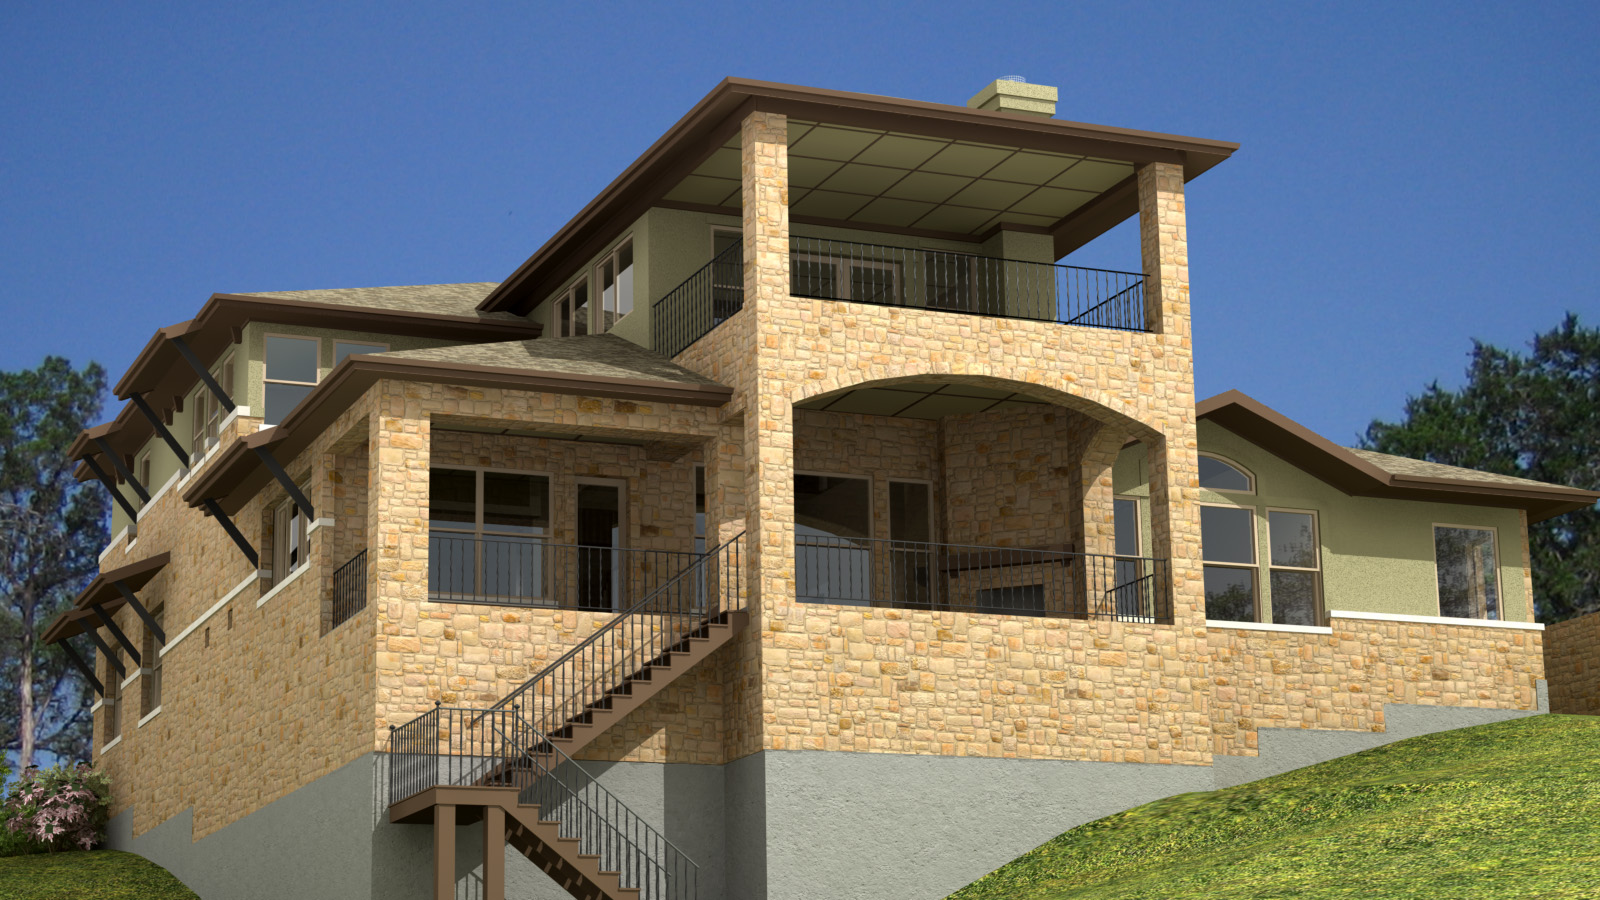 Architecture House Design Great Hillside House Plans Design With Exposed Natural Stone Exterior And Safety Iron Rail Also Good Outside View Point Interesting Hillside House Plans Design Architecture